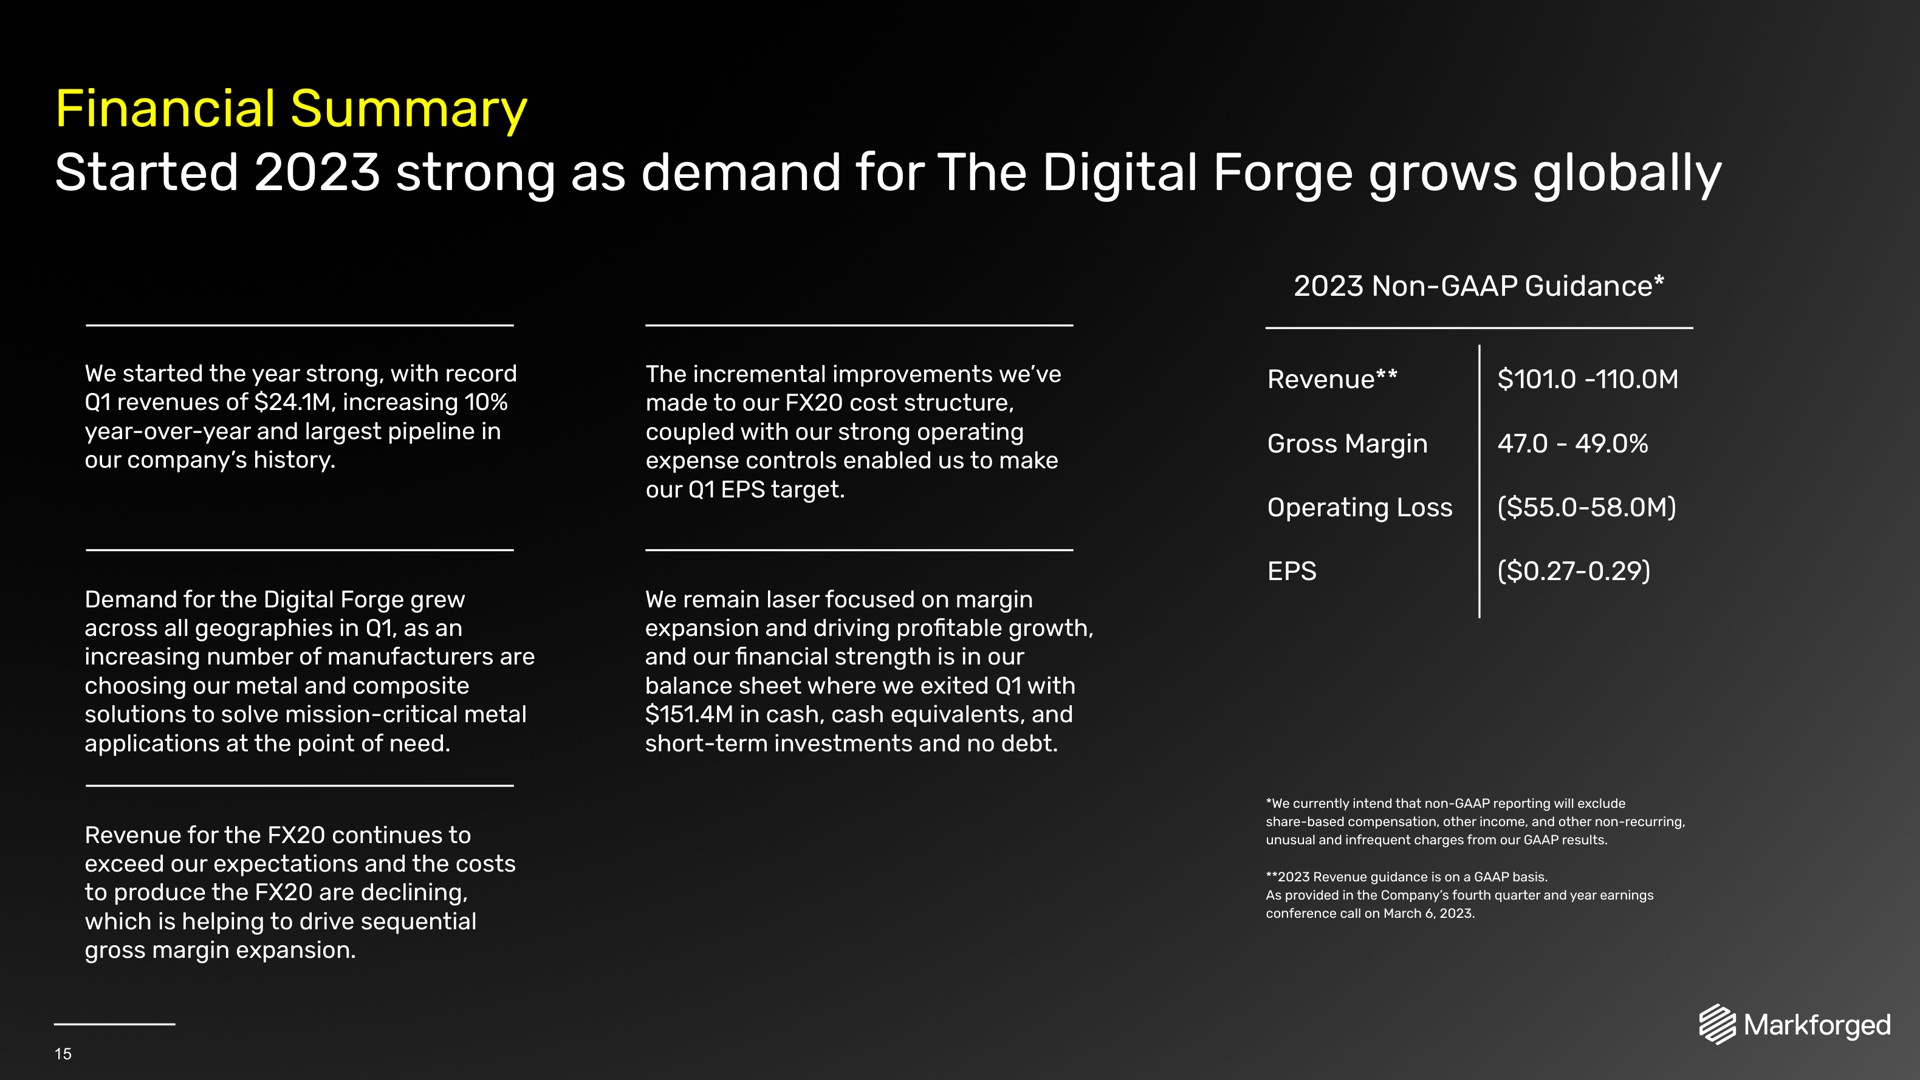 financial summary started strong as demand for the digital forge grows globally | Markforged